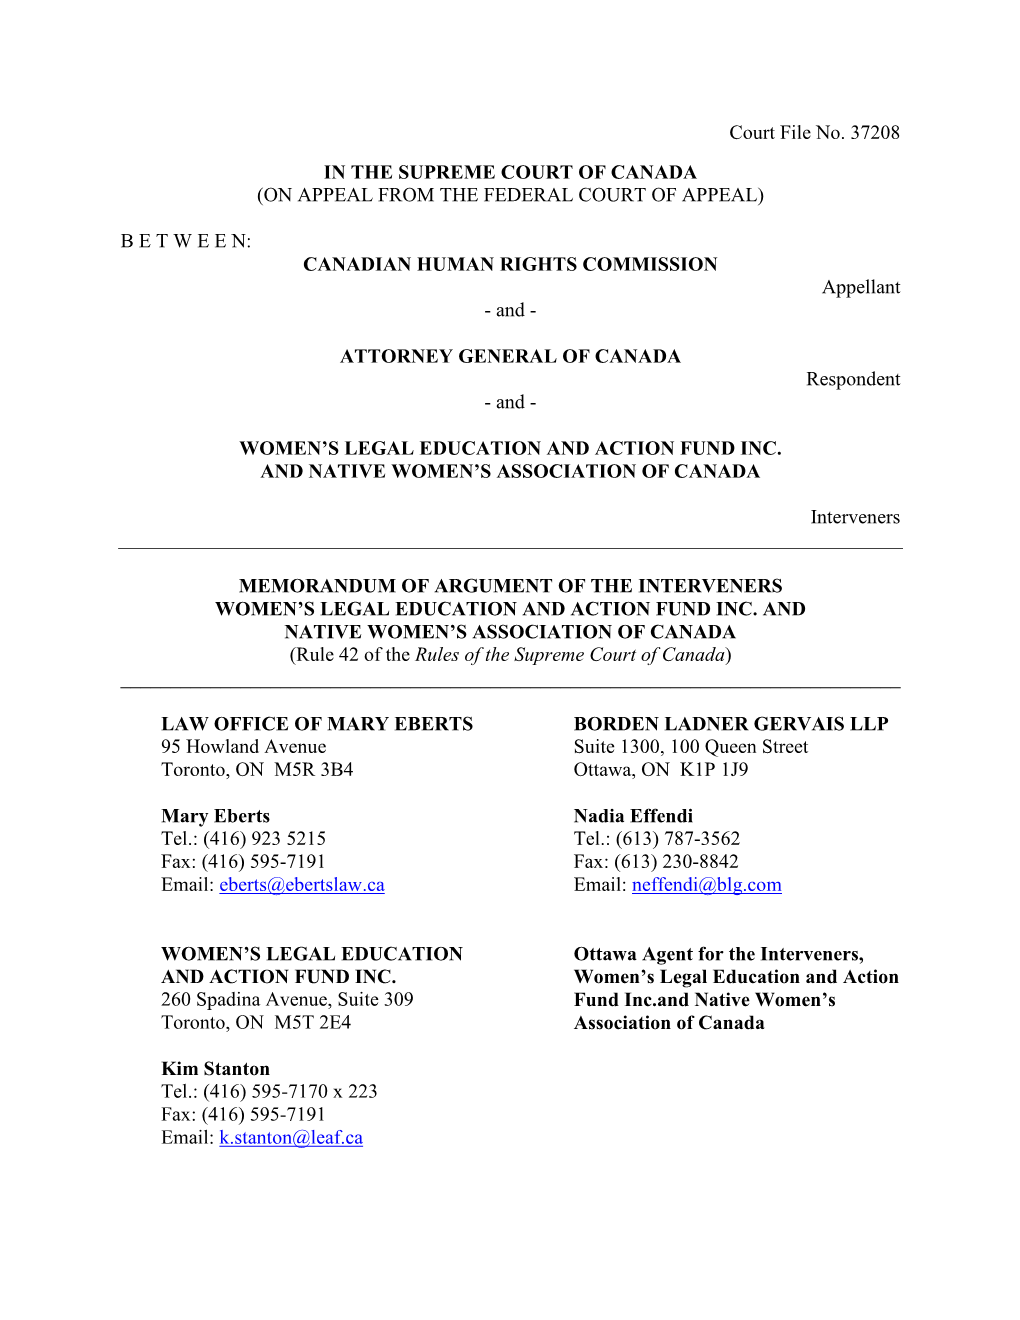 Court File No. 37208 in the SUPREME COURT of CANADA (ON APPEAL from the FEDERAL COURT of APPEAL)